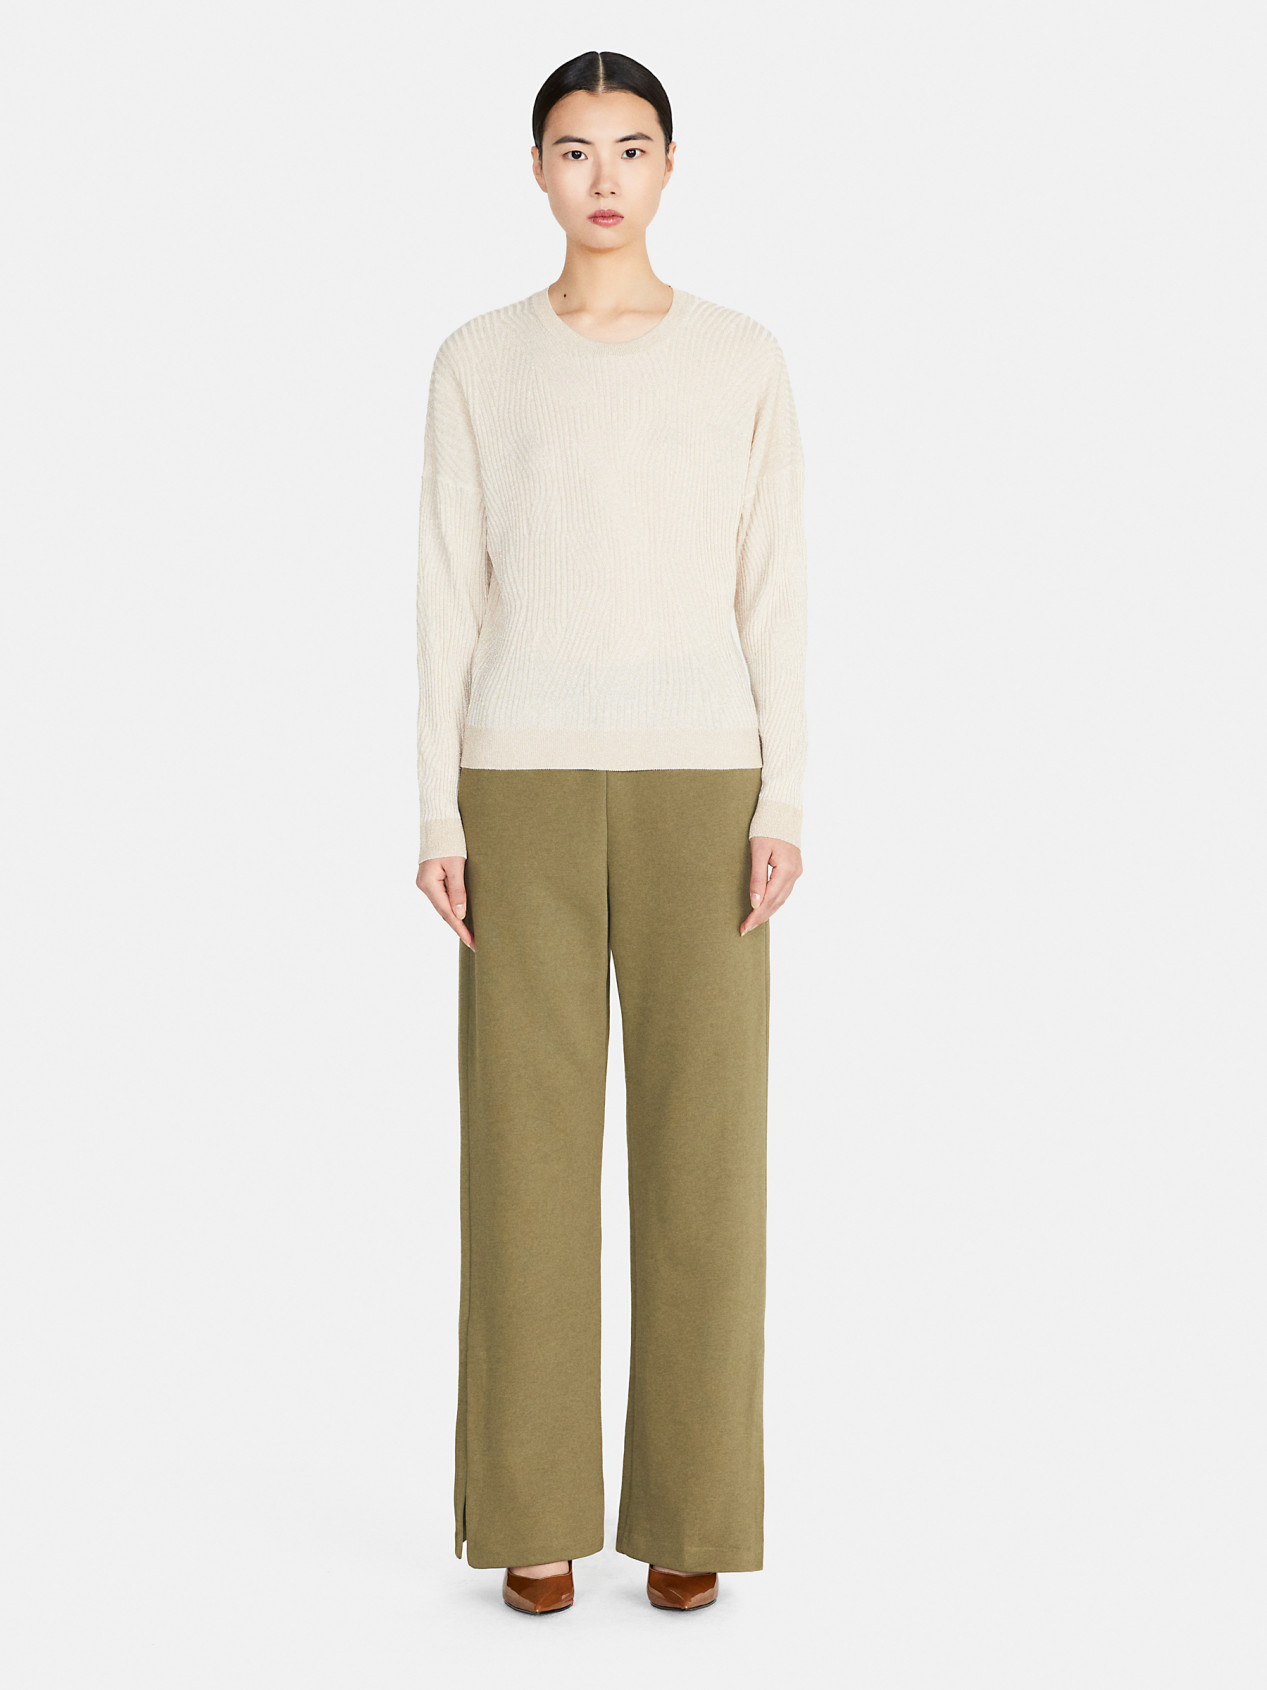 Sisley - Flare Fit Sweatpants, Woman, Military Green, Size: 40